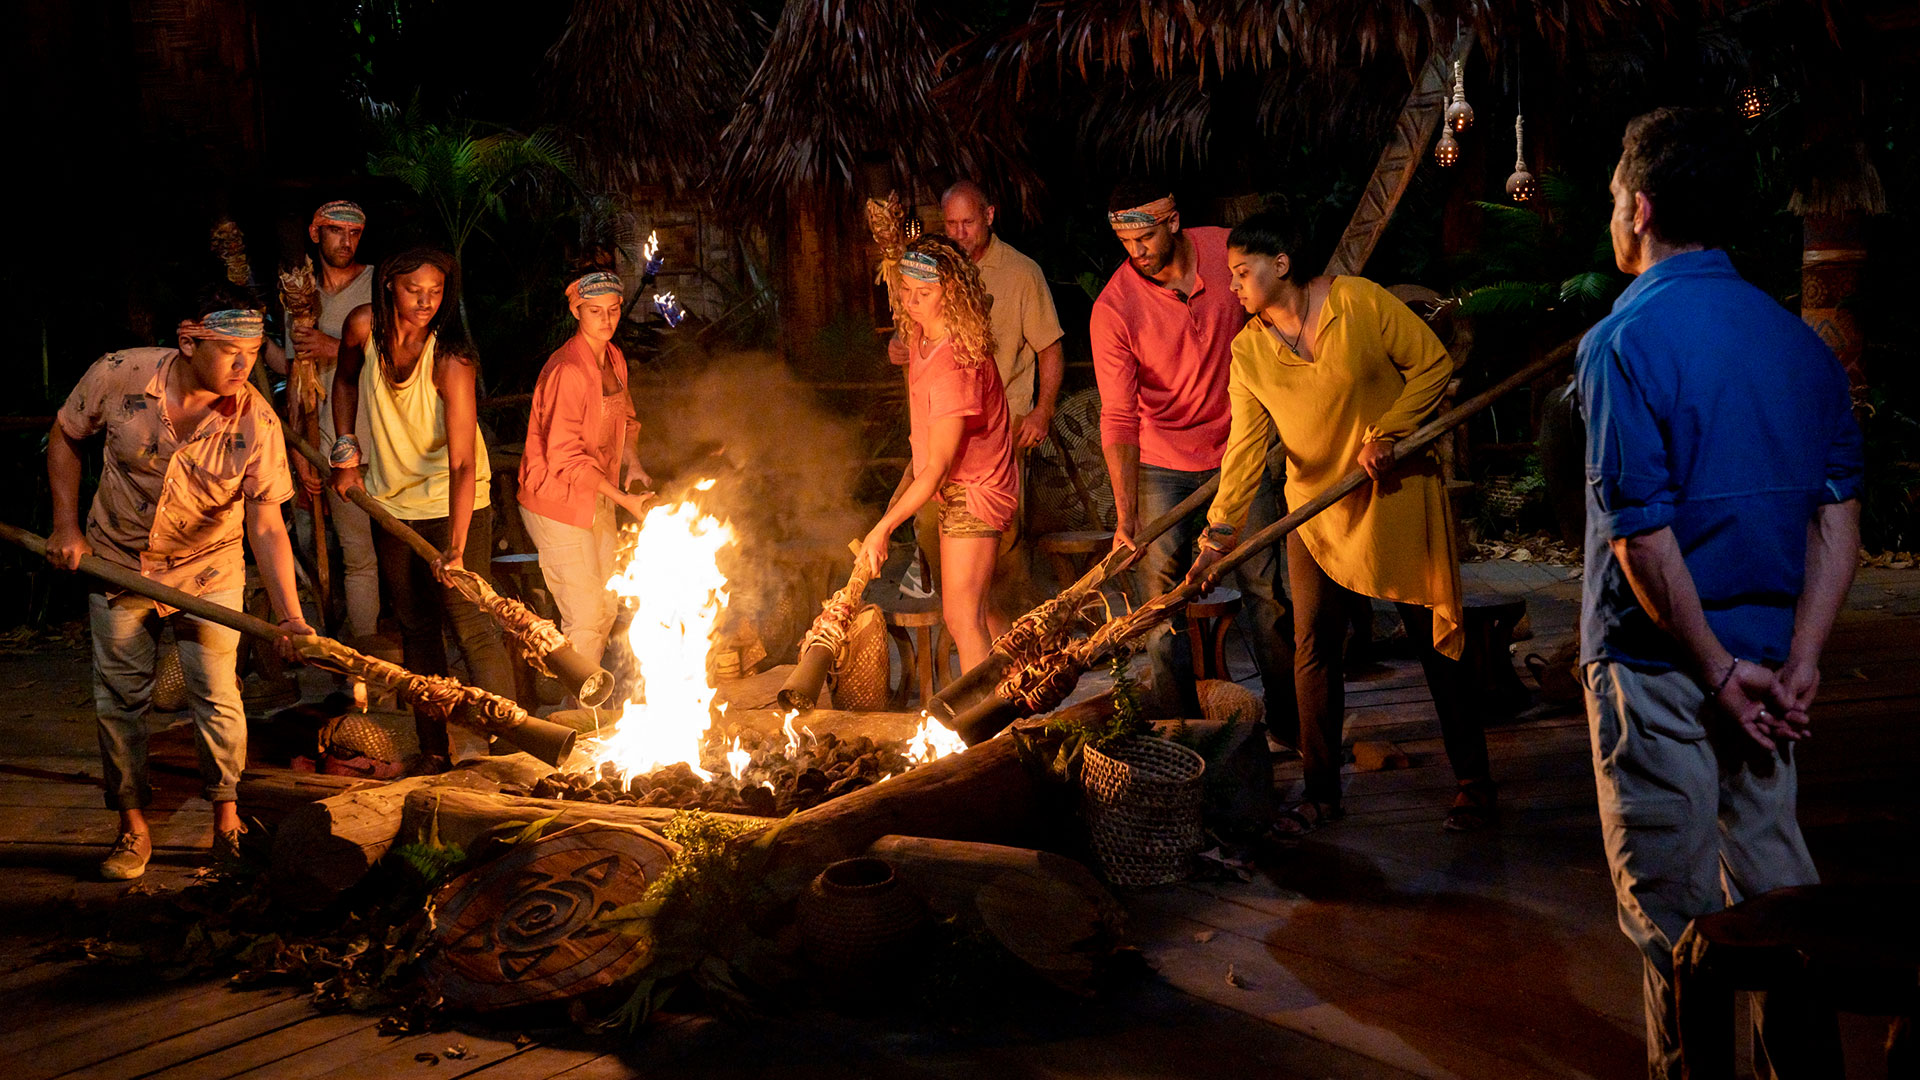 Survivor Season 39 Spoilers: The First Castaway Goes Home In A Blindside1920 x 1080